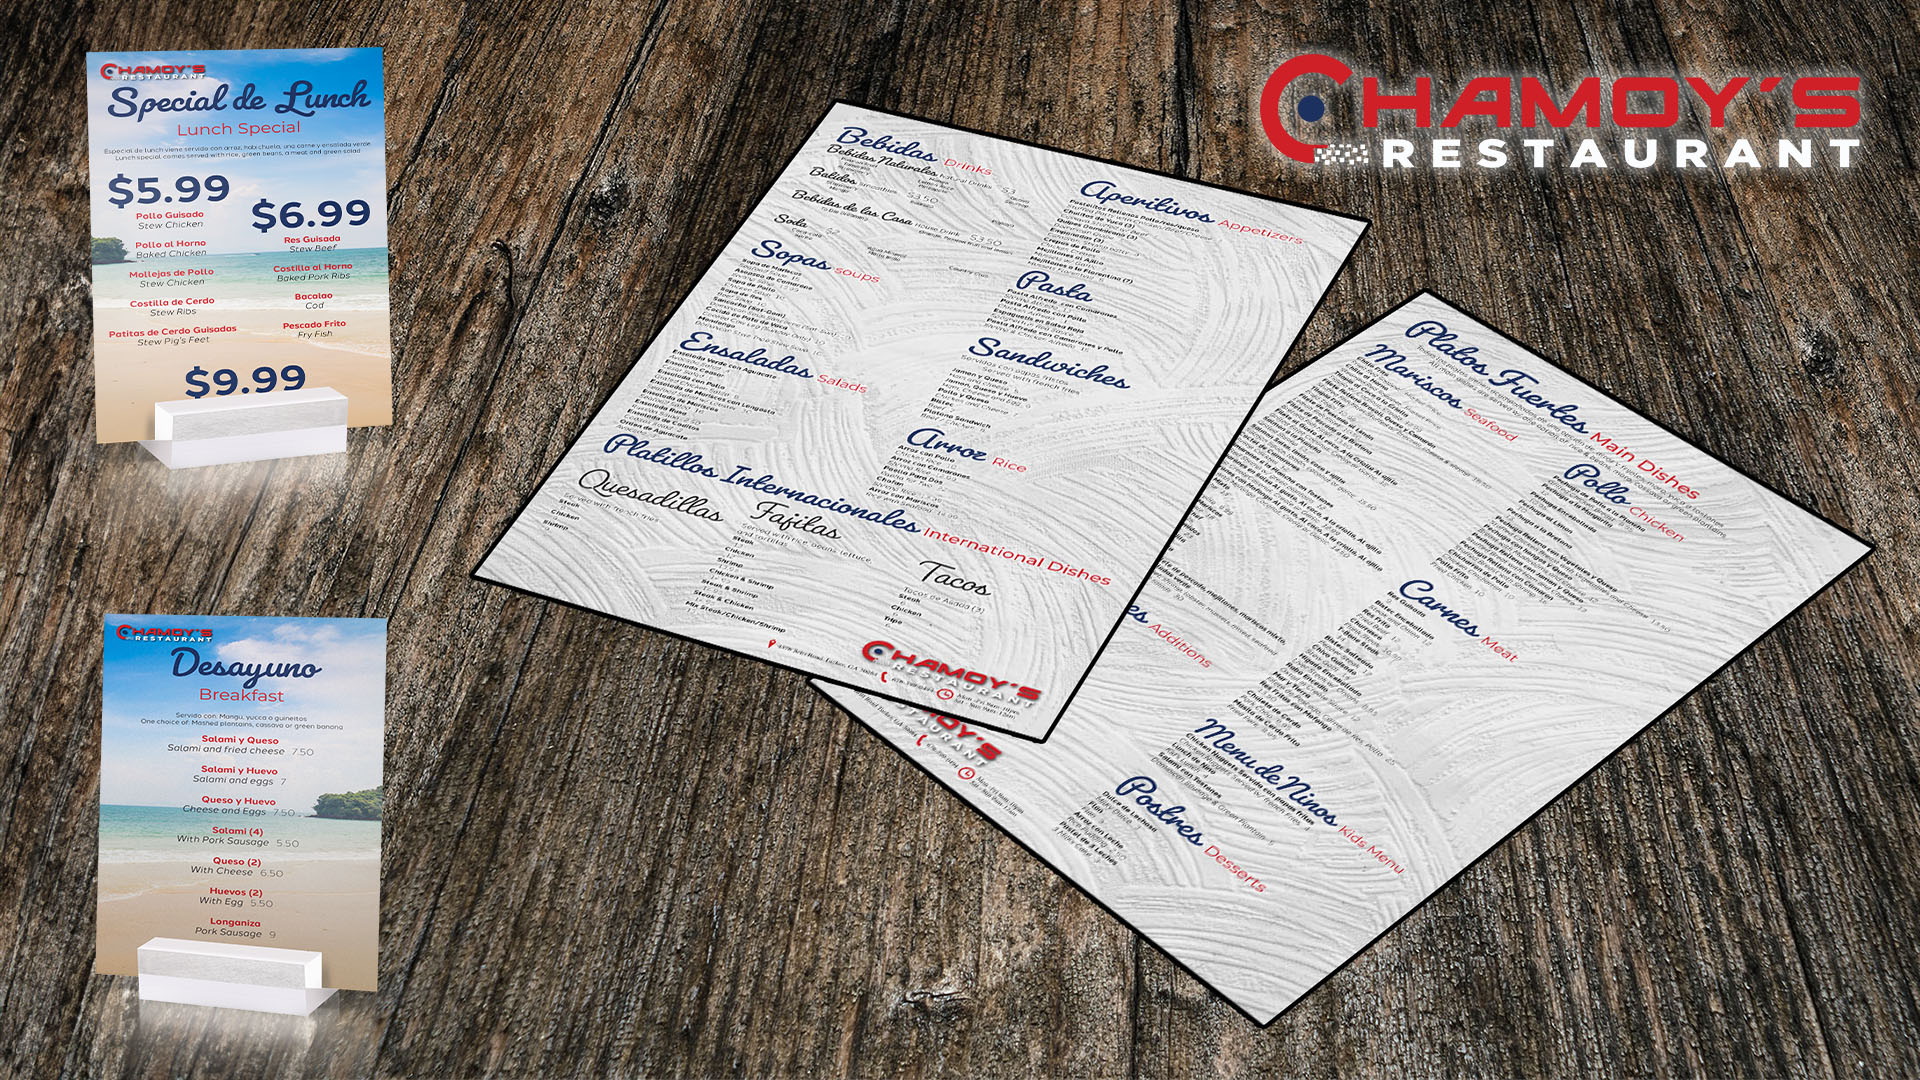 Chamoy / "Chamoy‚" Restaurant Menus," In store menus, 17 x 11 inches prints (Right two), Specials menu, 5.5 x 4.25 inches prints (Right two), 2022. Menus for Cuban restaurant in Tucker, GA.